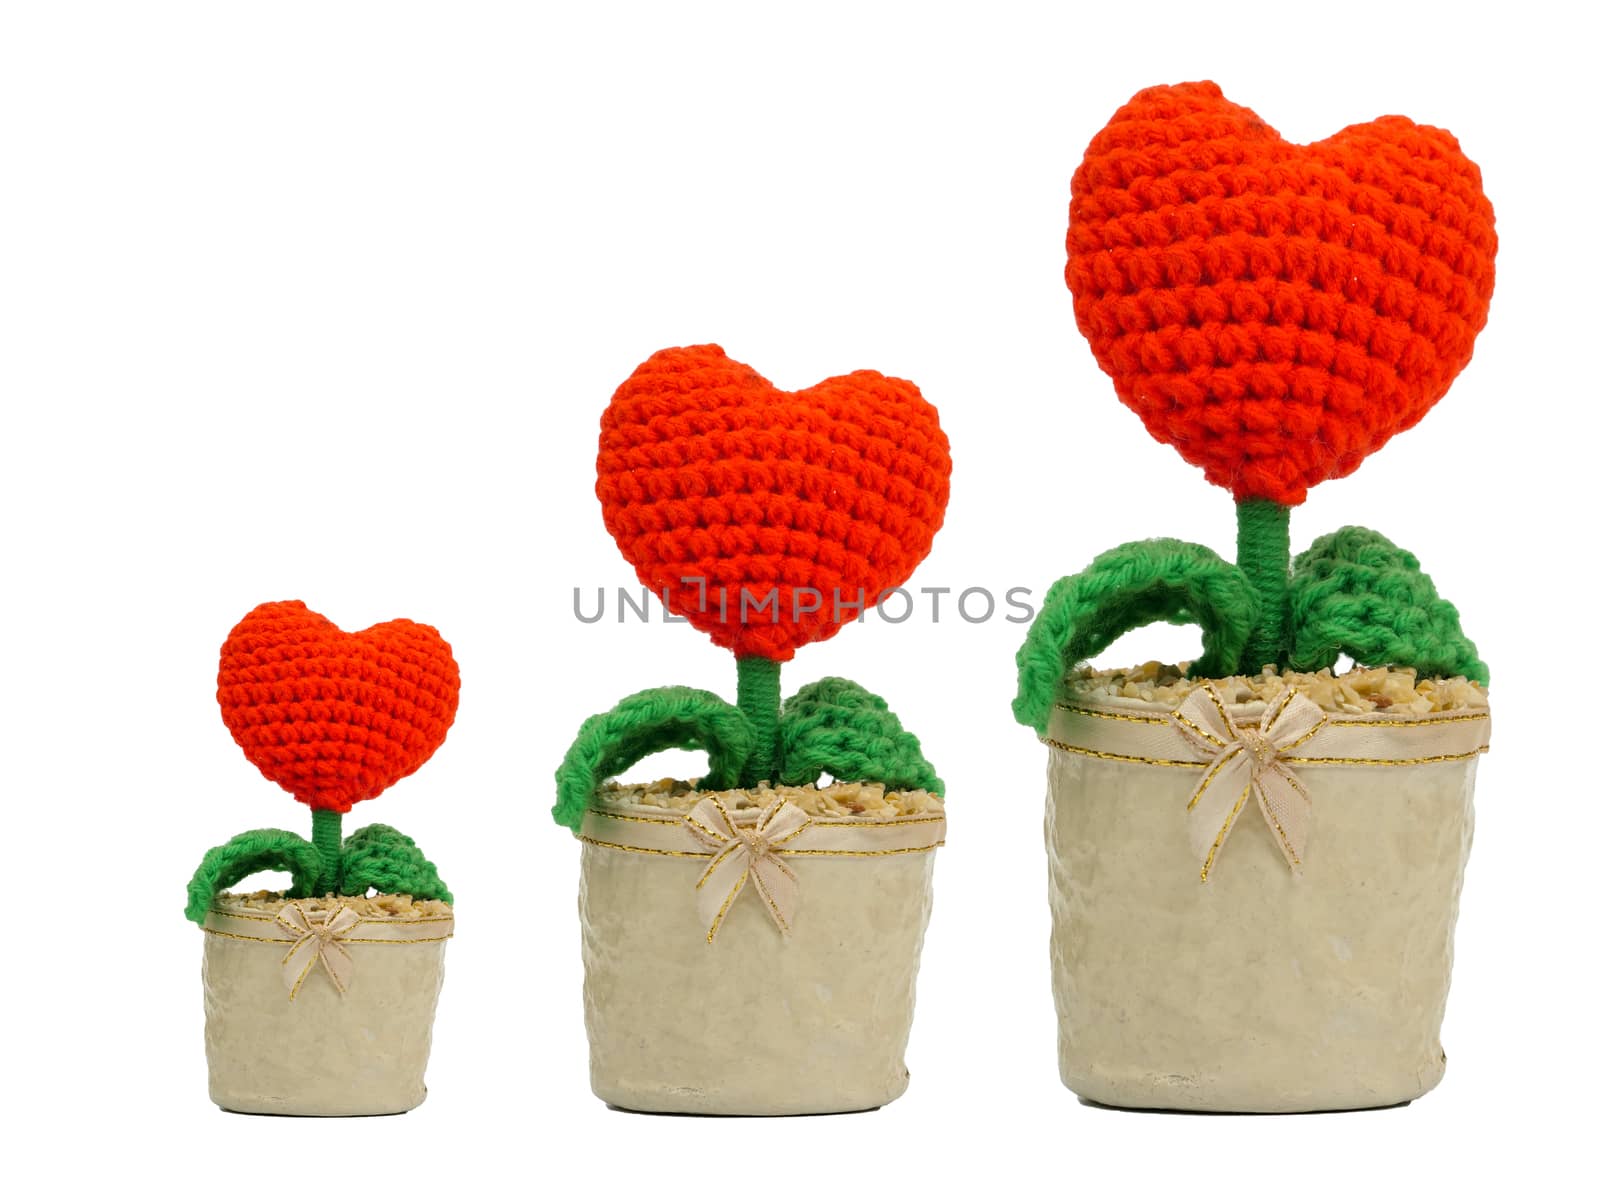 three plants made of wool with heart shape flowers in paper pots, isolated on white background